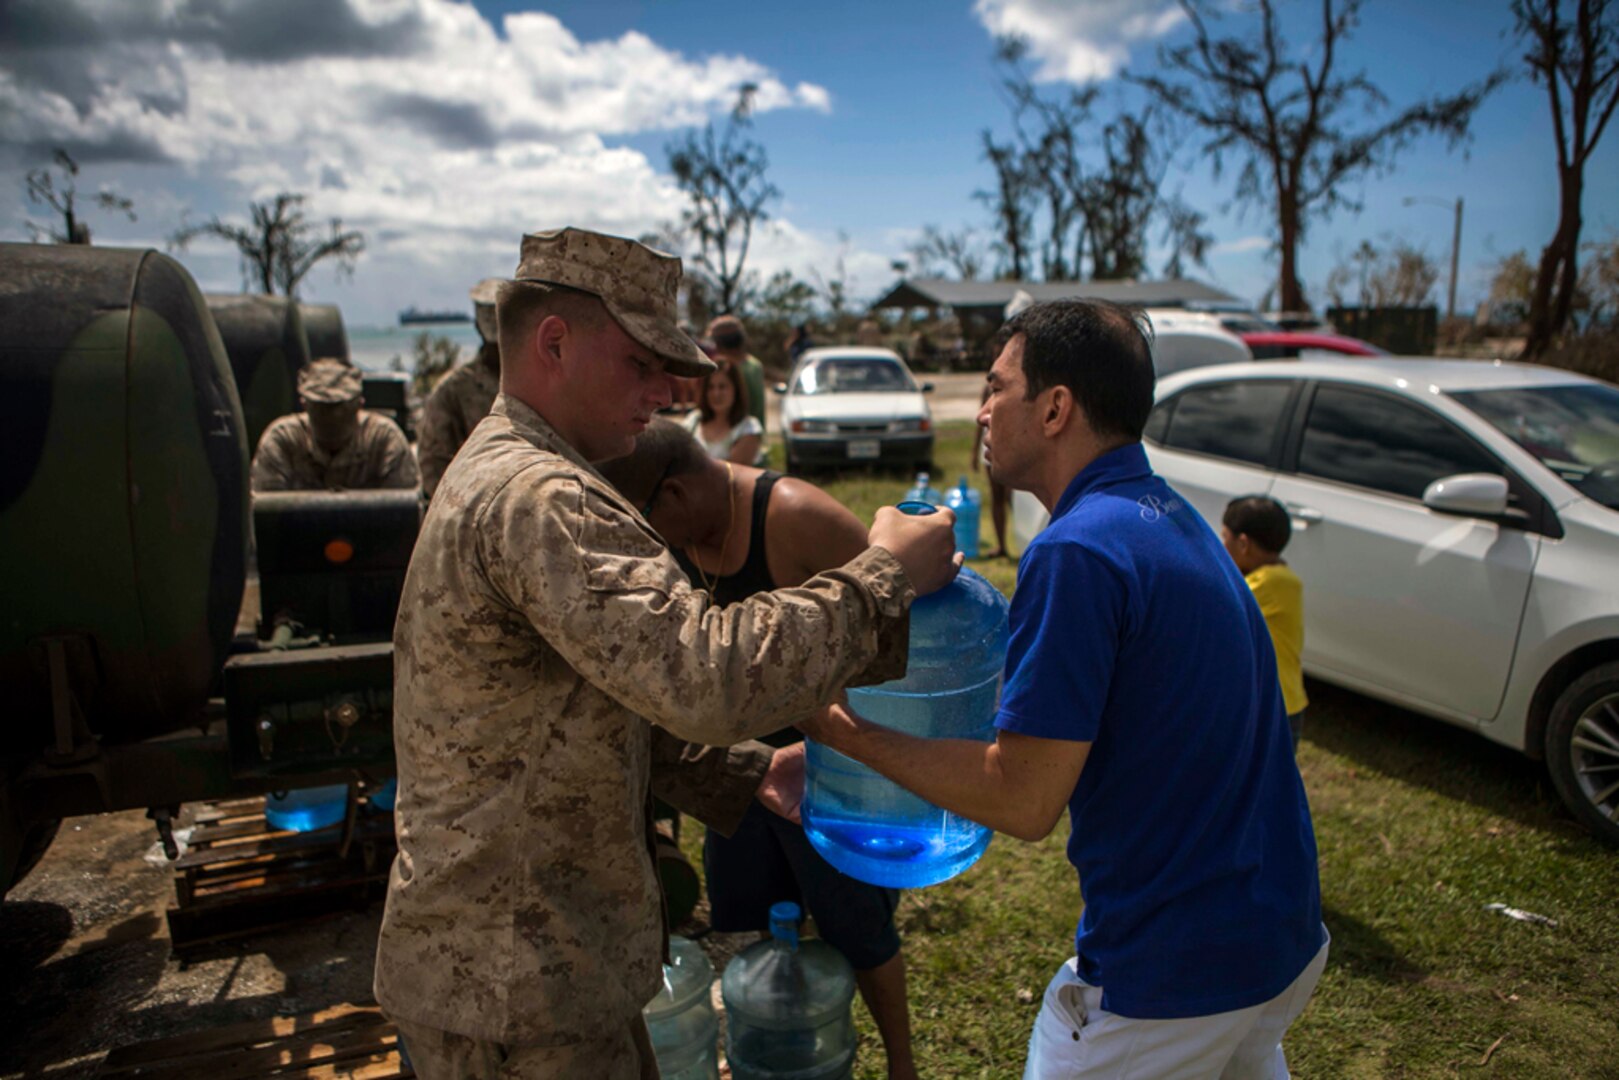 SAIPAN (Aug. 11, 2015) - U.S. Marines with Combat Logistics Battalion 31, 31st
 Marine Expeditionary Unit, distribute water to local civilians during typhoon relief efforts. The 31st MEU and the ships of the Bonhomme Richard Amphibious Ready Group are assisting the Federal Emergency Management Agency with distributing emergency relief supplies to Saipan after the island was struck by Typhoon Soudelor Aug. 2-3.